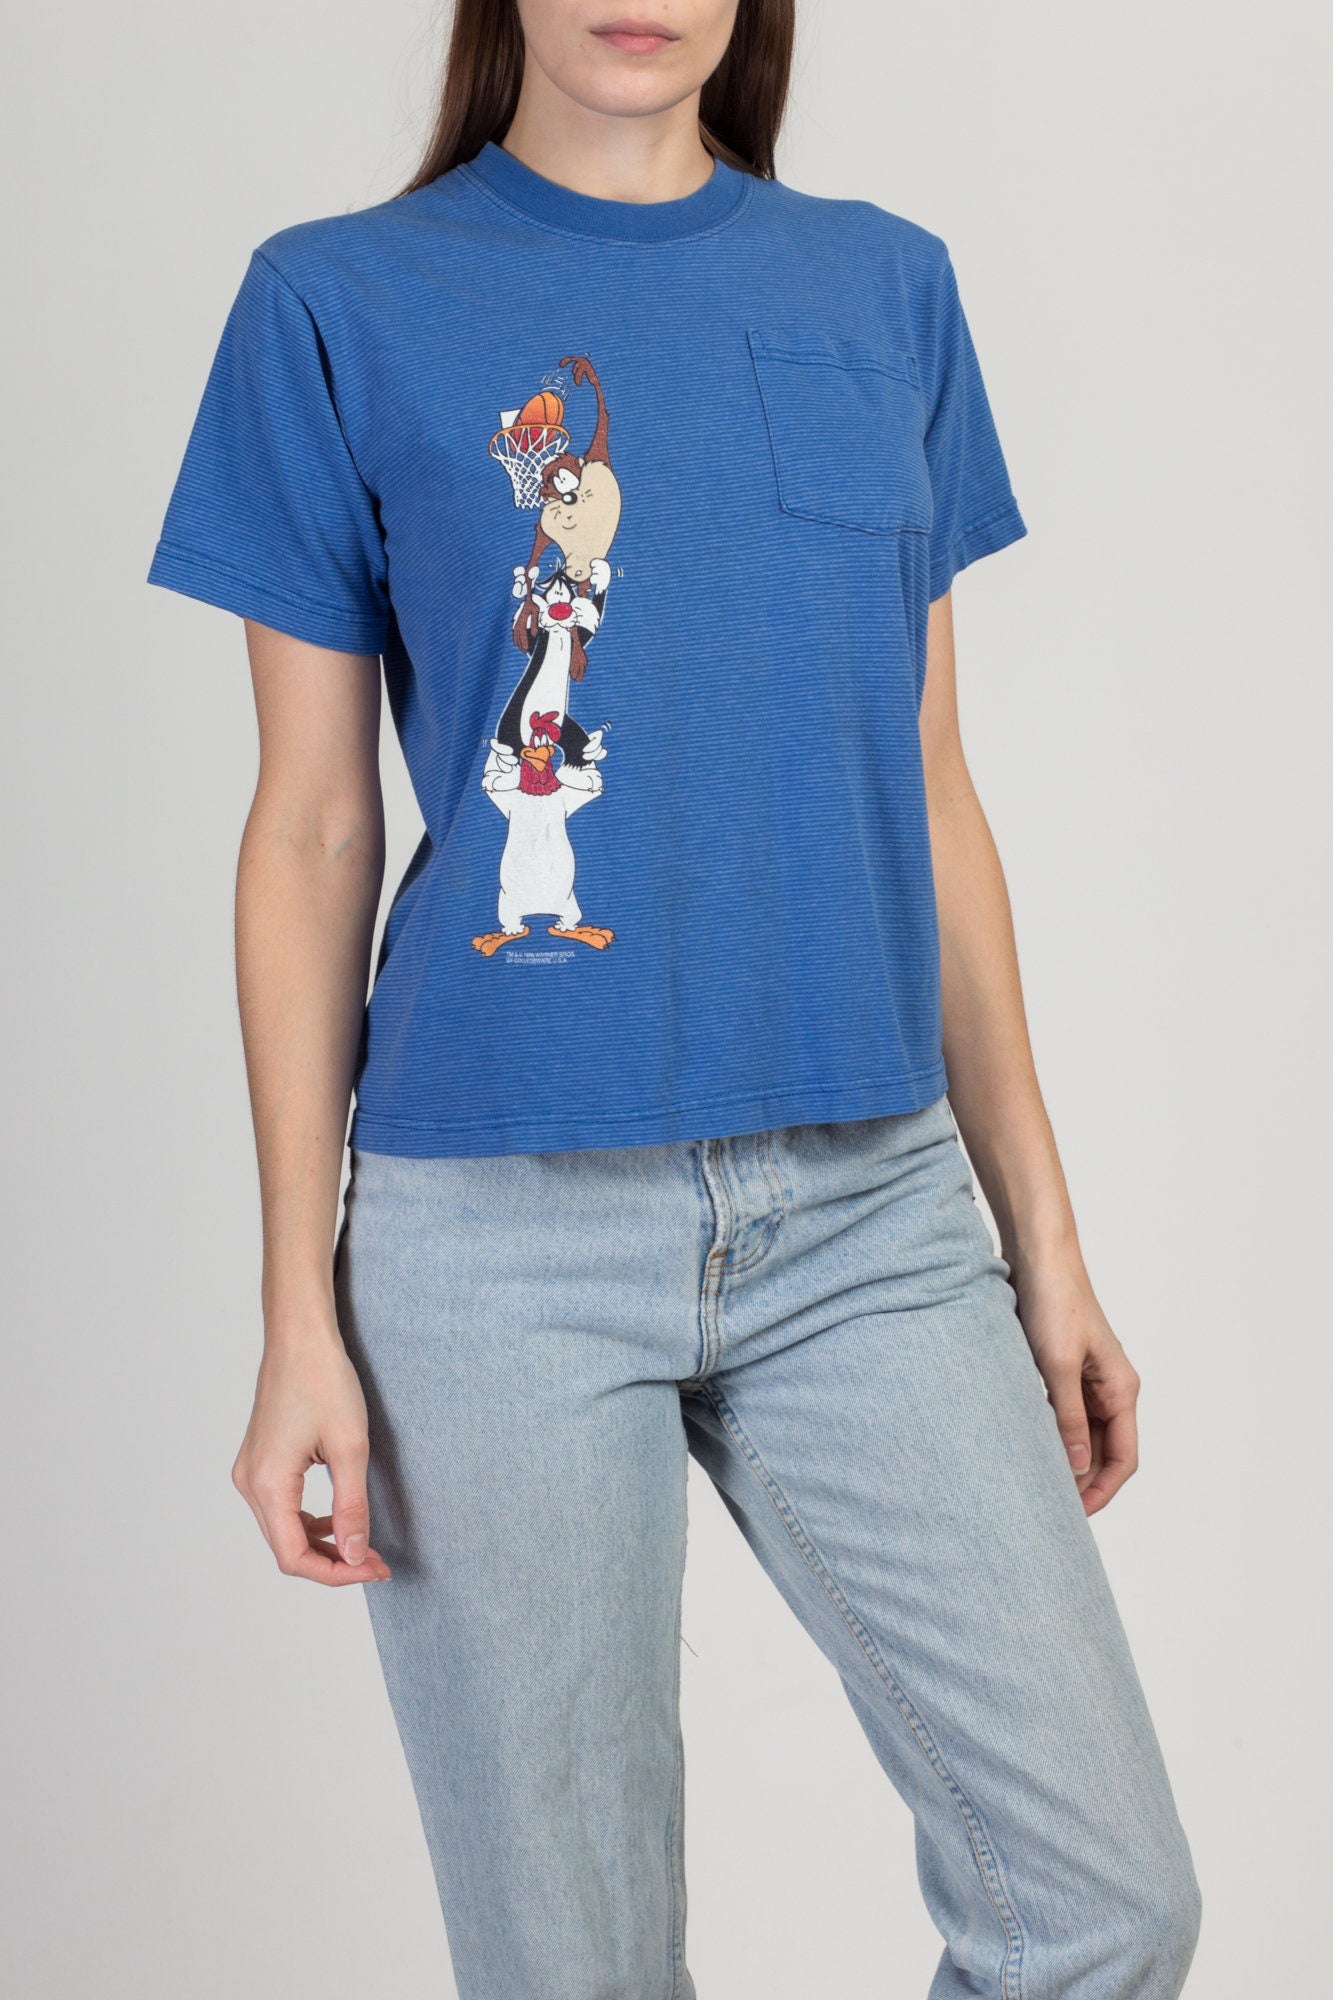 90s Looney Tunes Basketball T Shirt - Small 